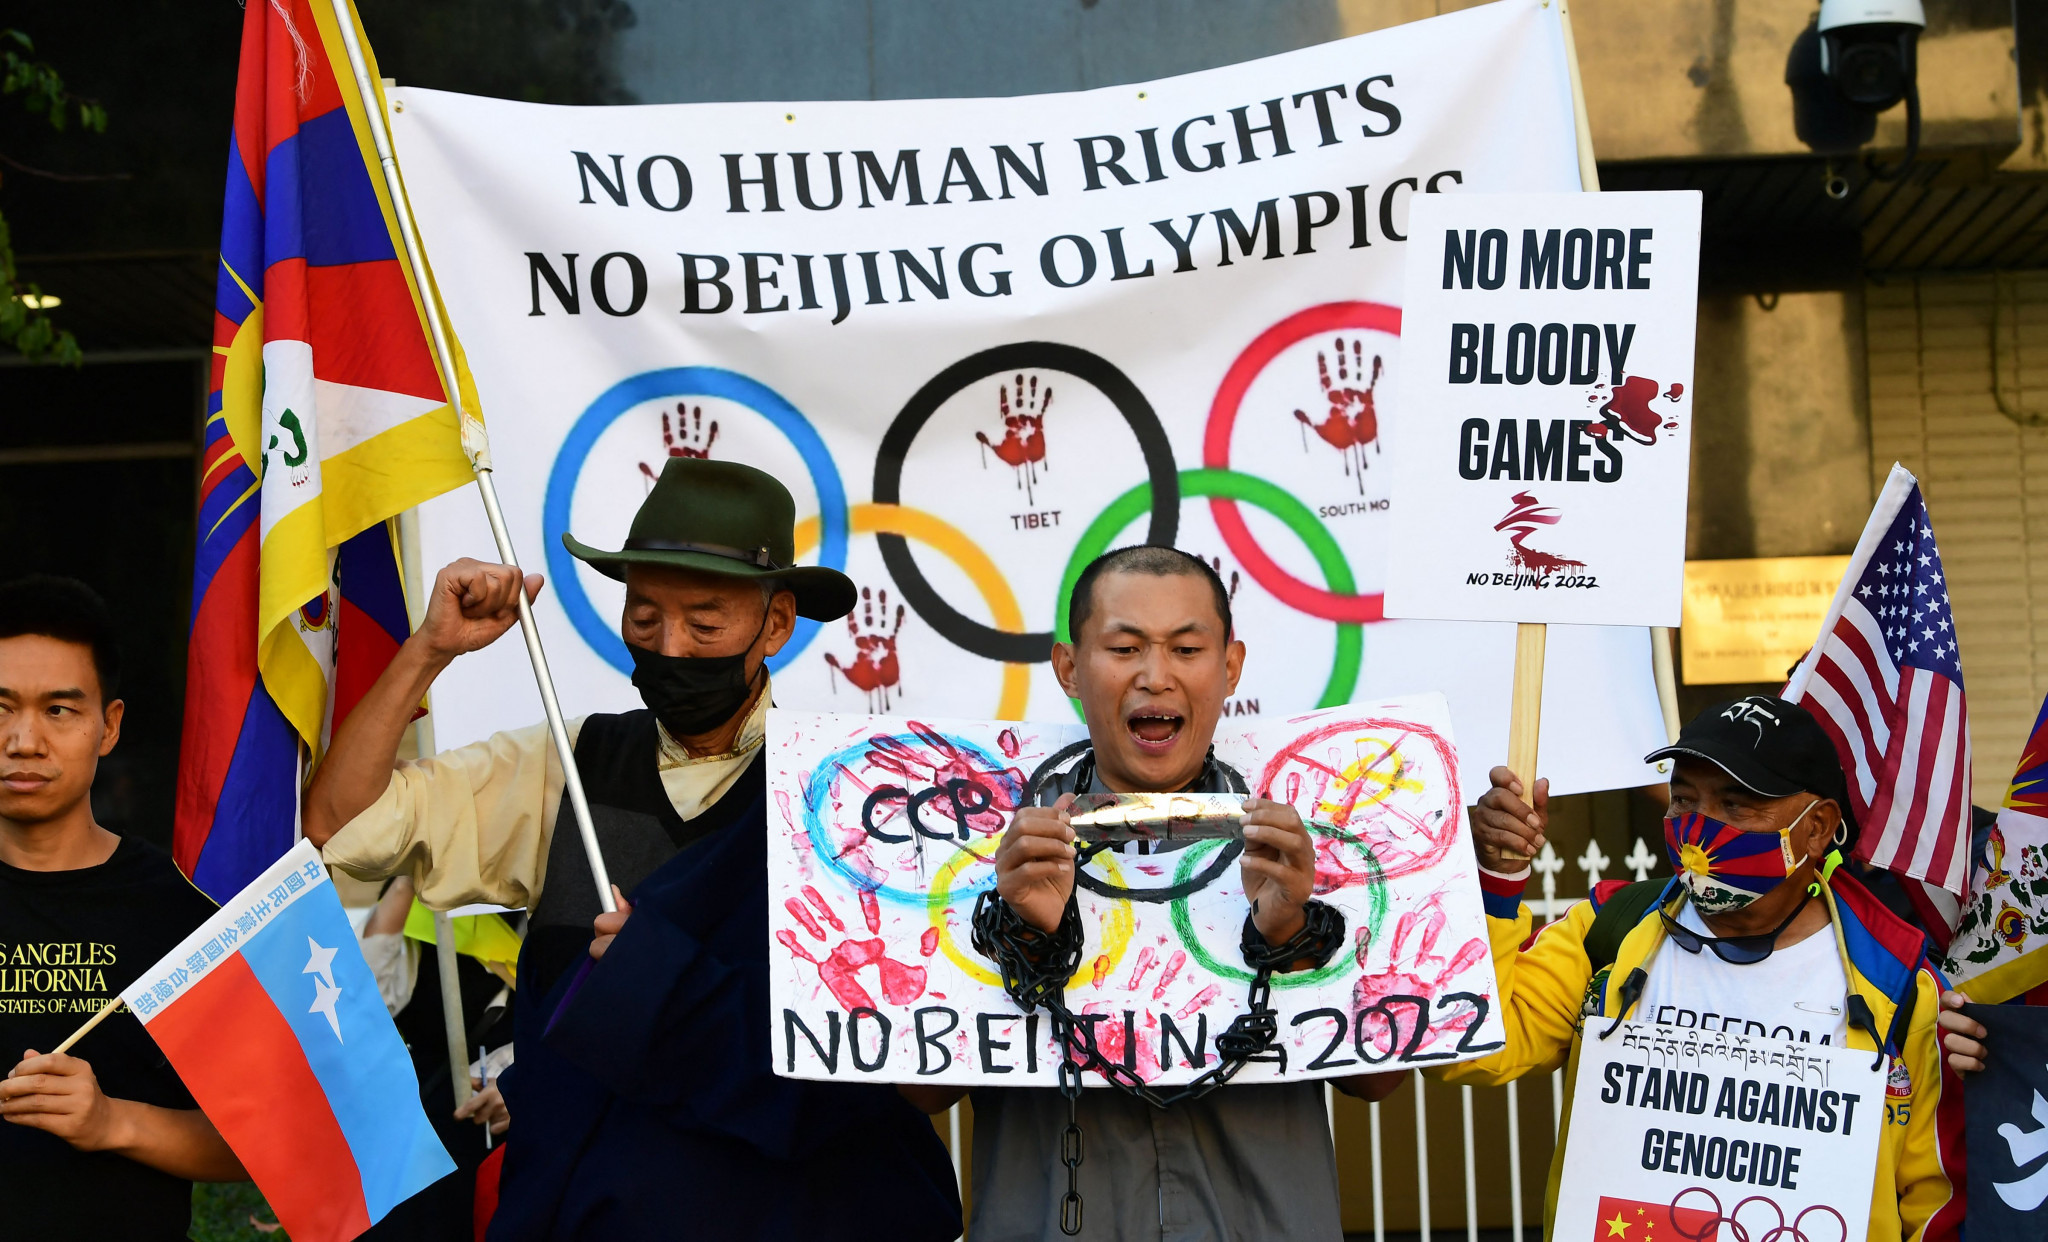 There have been widespread protests against the Beijing 2022 Olympics due to China's human rights record ©Getty Images